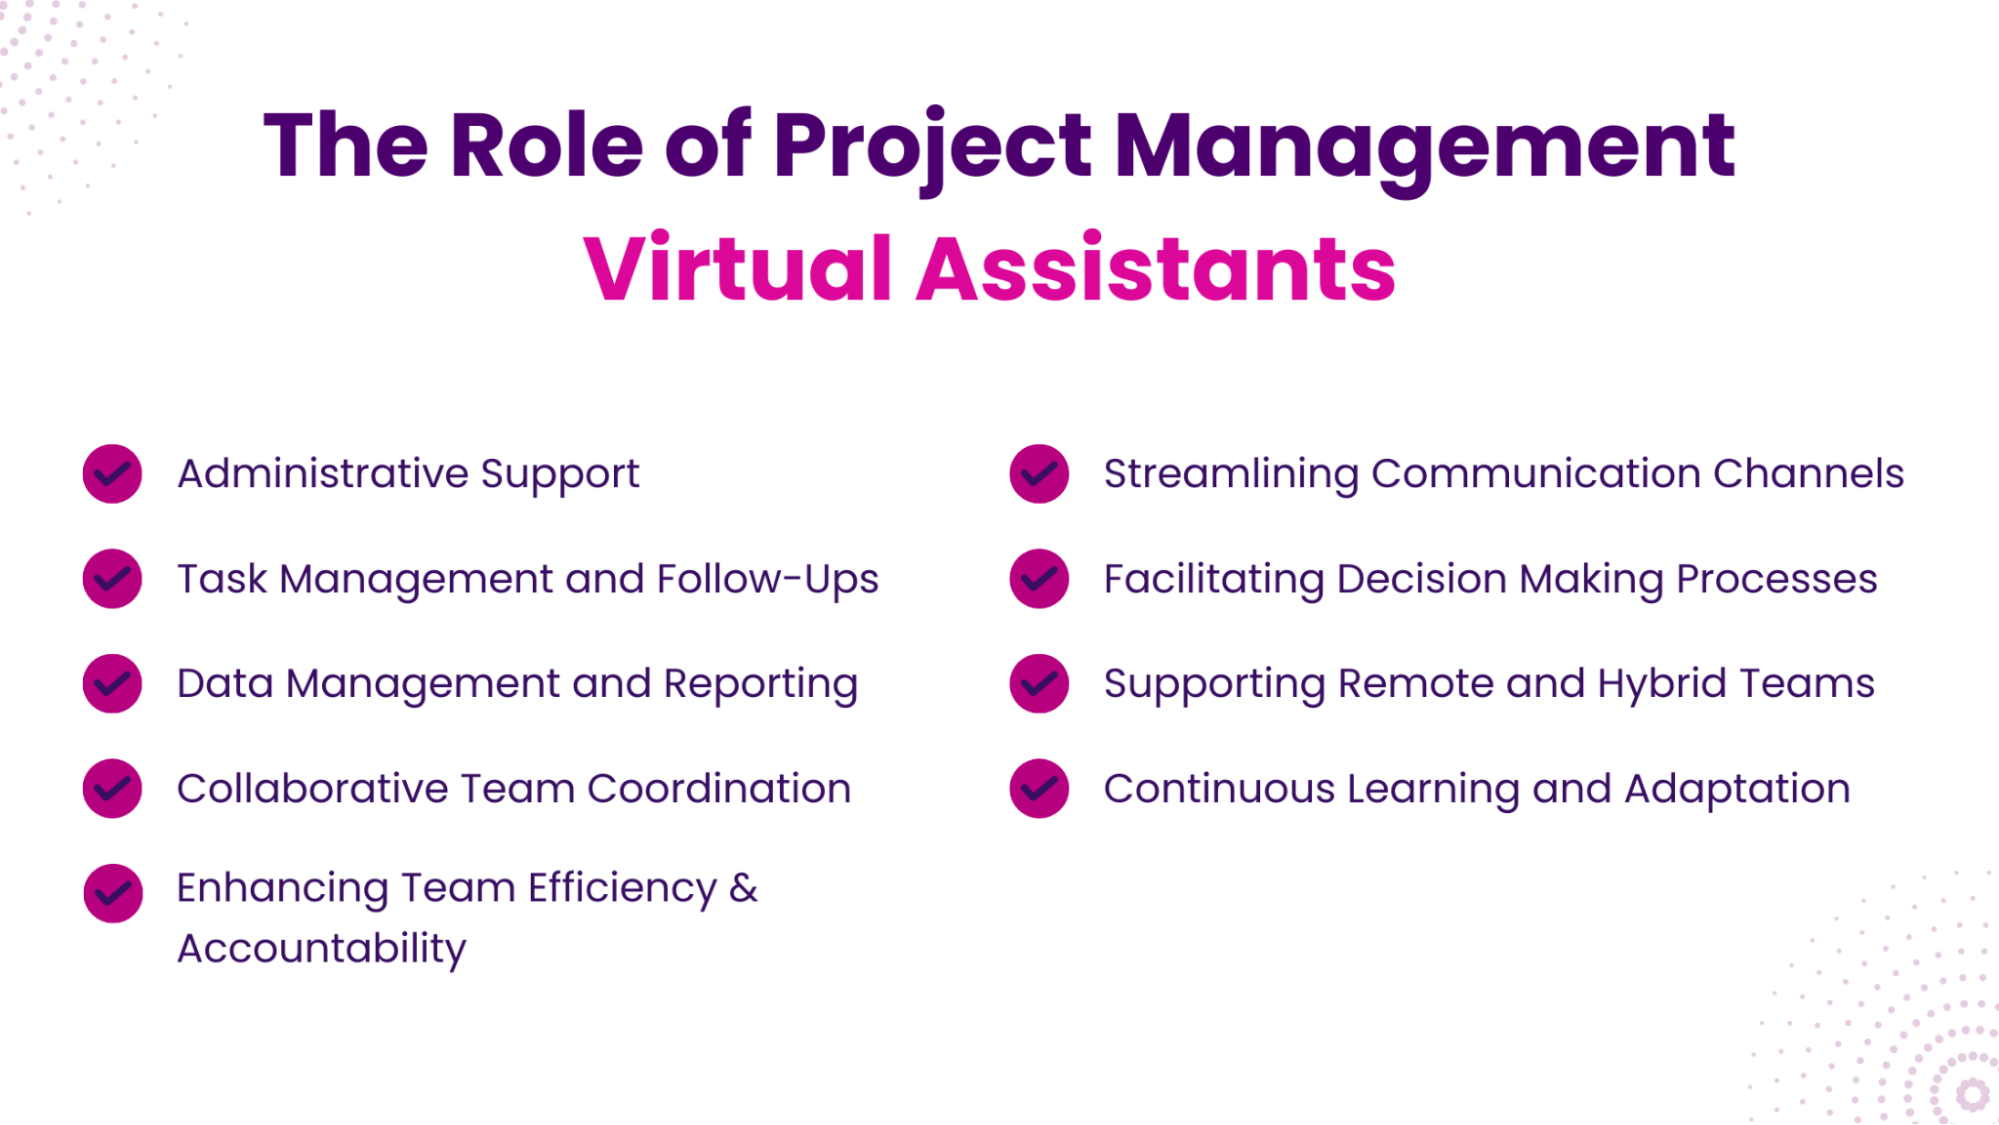 The Role of Project Management Virtual Assistants